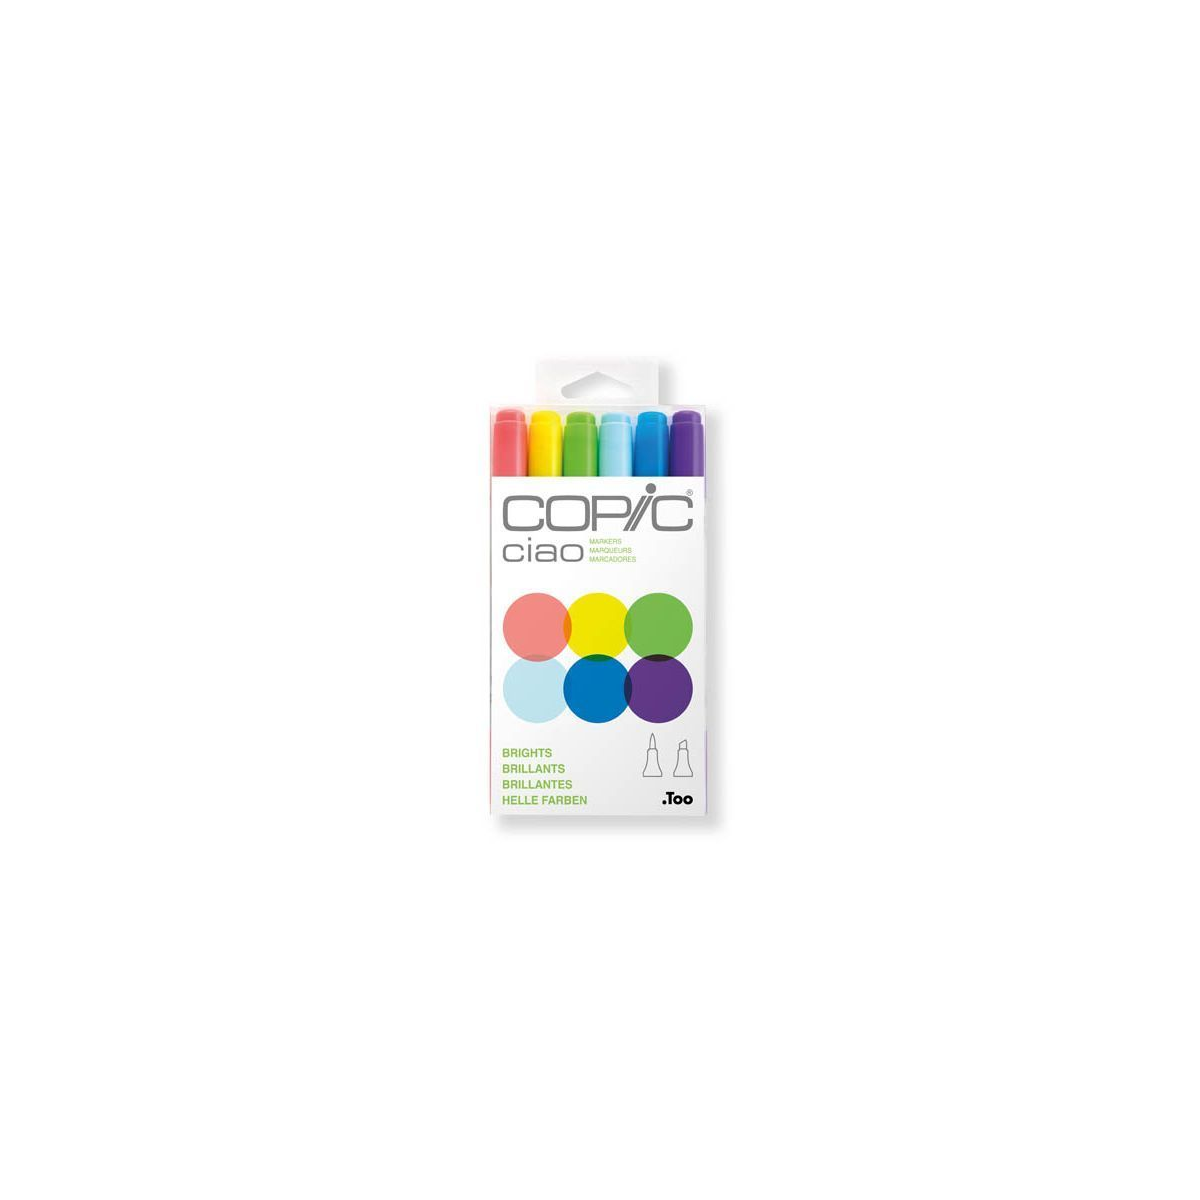 COPIC CIAO 6uds set Brights